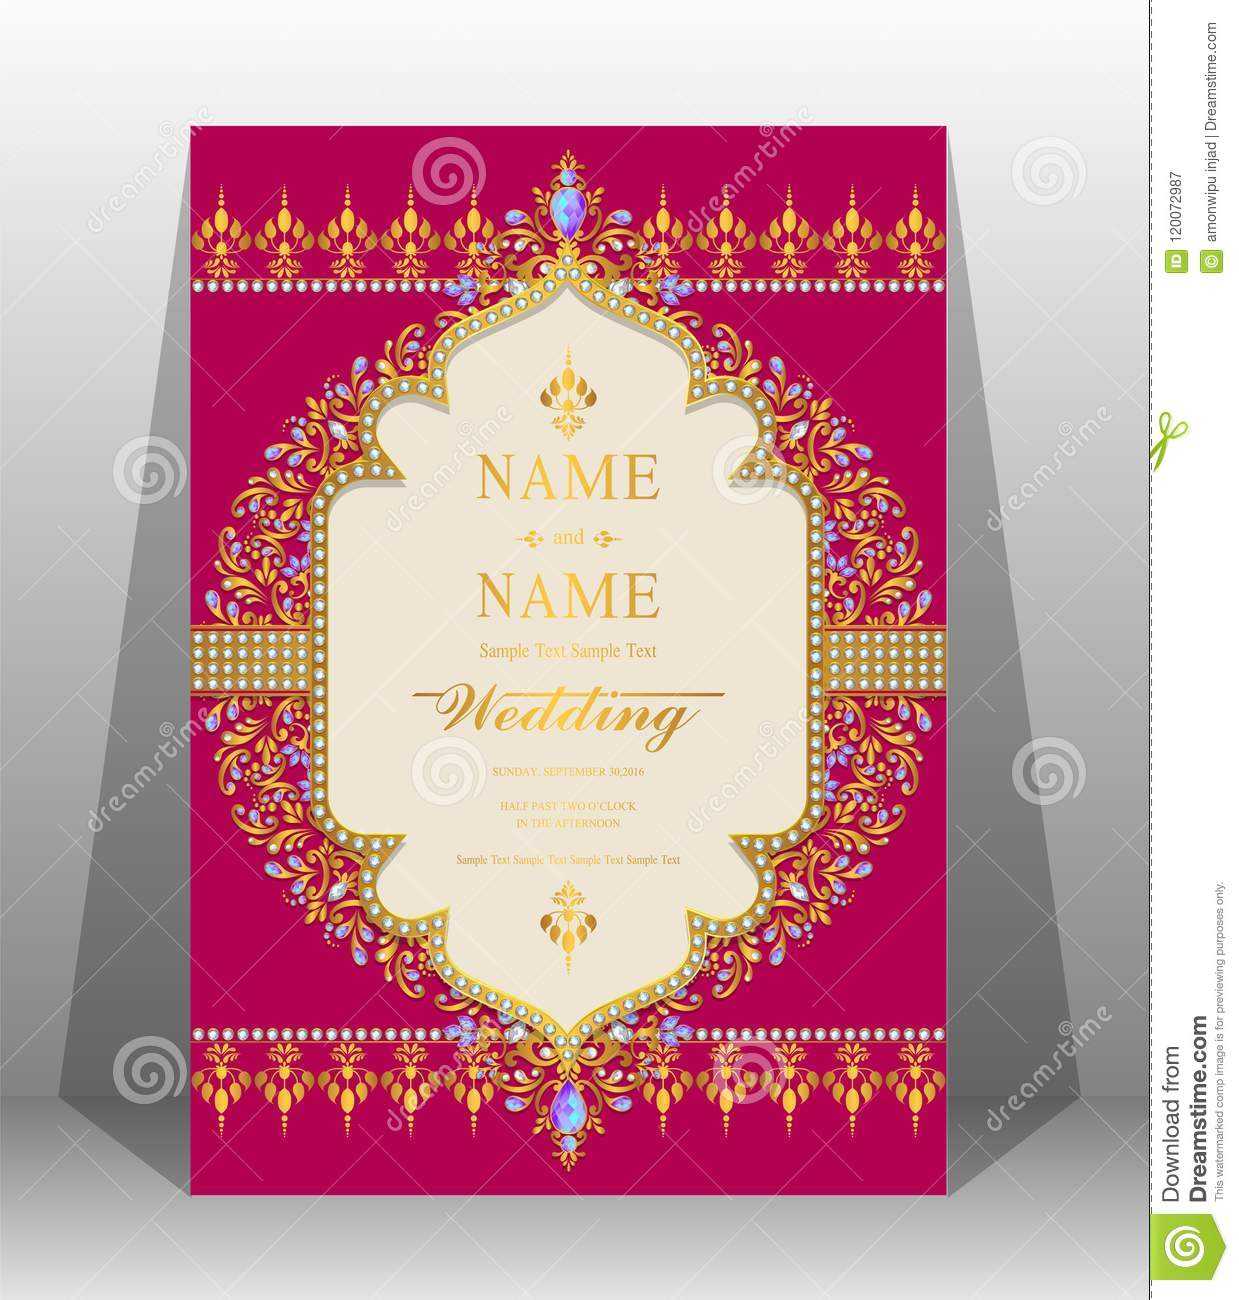 Wedding Invitation Card Templates . Stock Vector With Indian Wedding Cards Design Templates